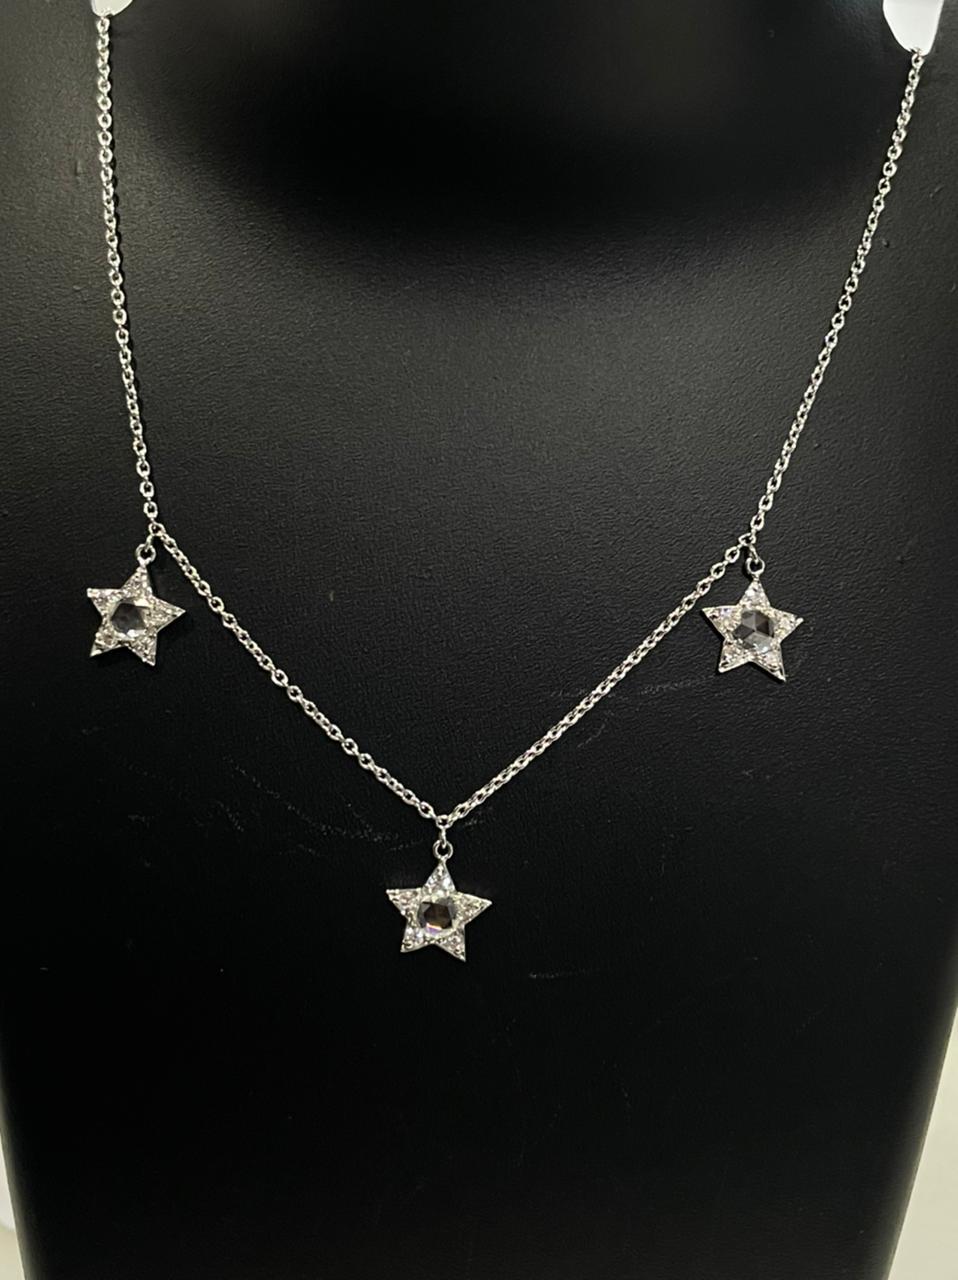 PANIM Rose Cut Diamond Star Necklace in 18k White Gold For Sale 1